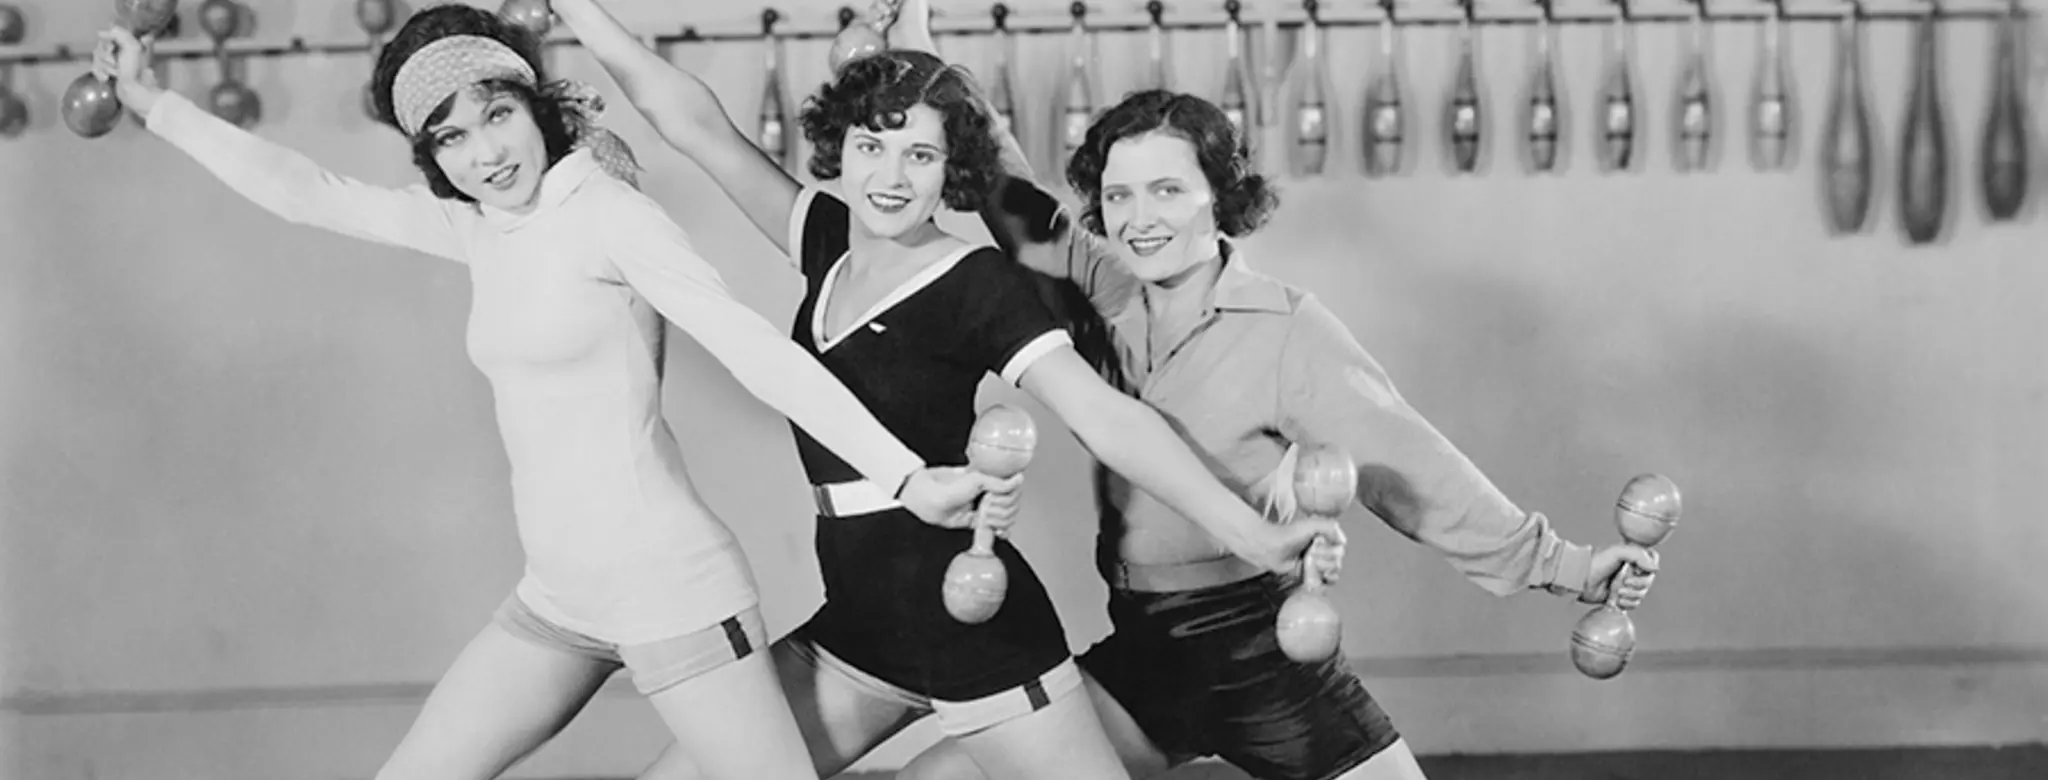 Three woman from the 1920s with vintage workout wear and weights